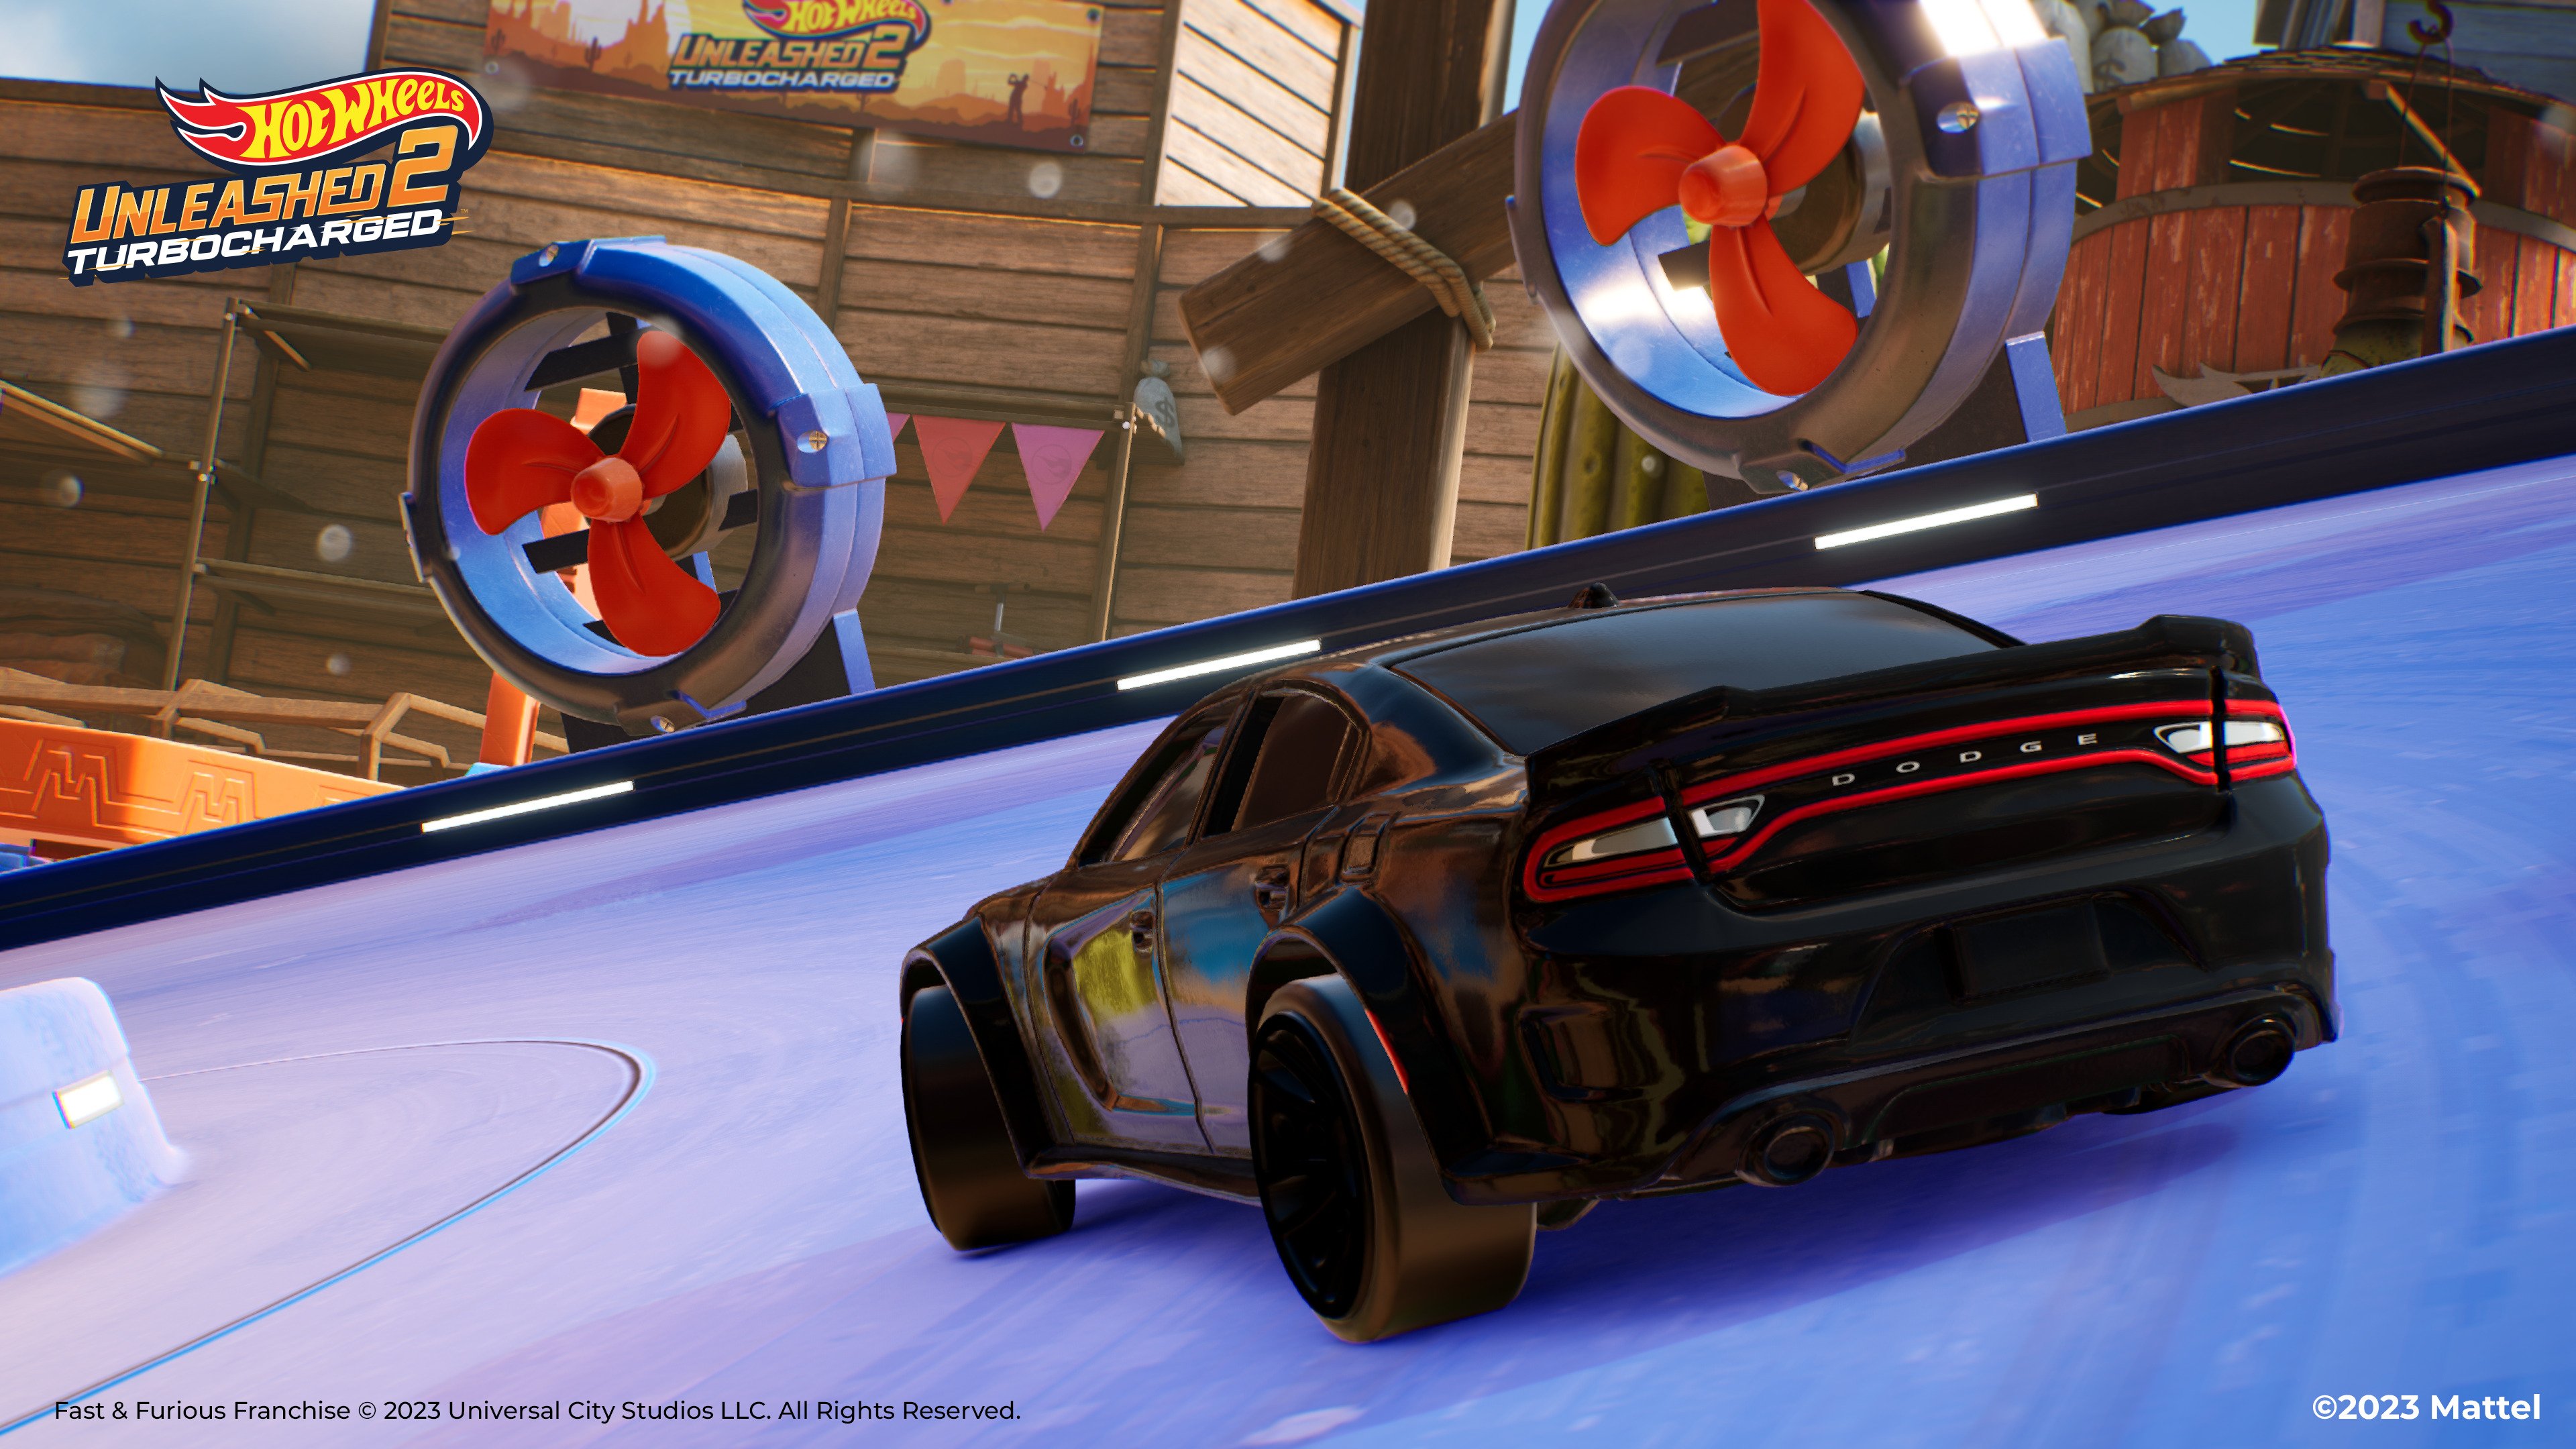 Hot Wheels Unleashed 2: Turbocharged announced for Switch